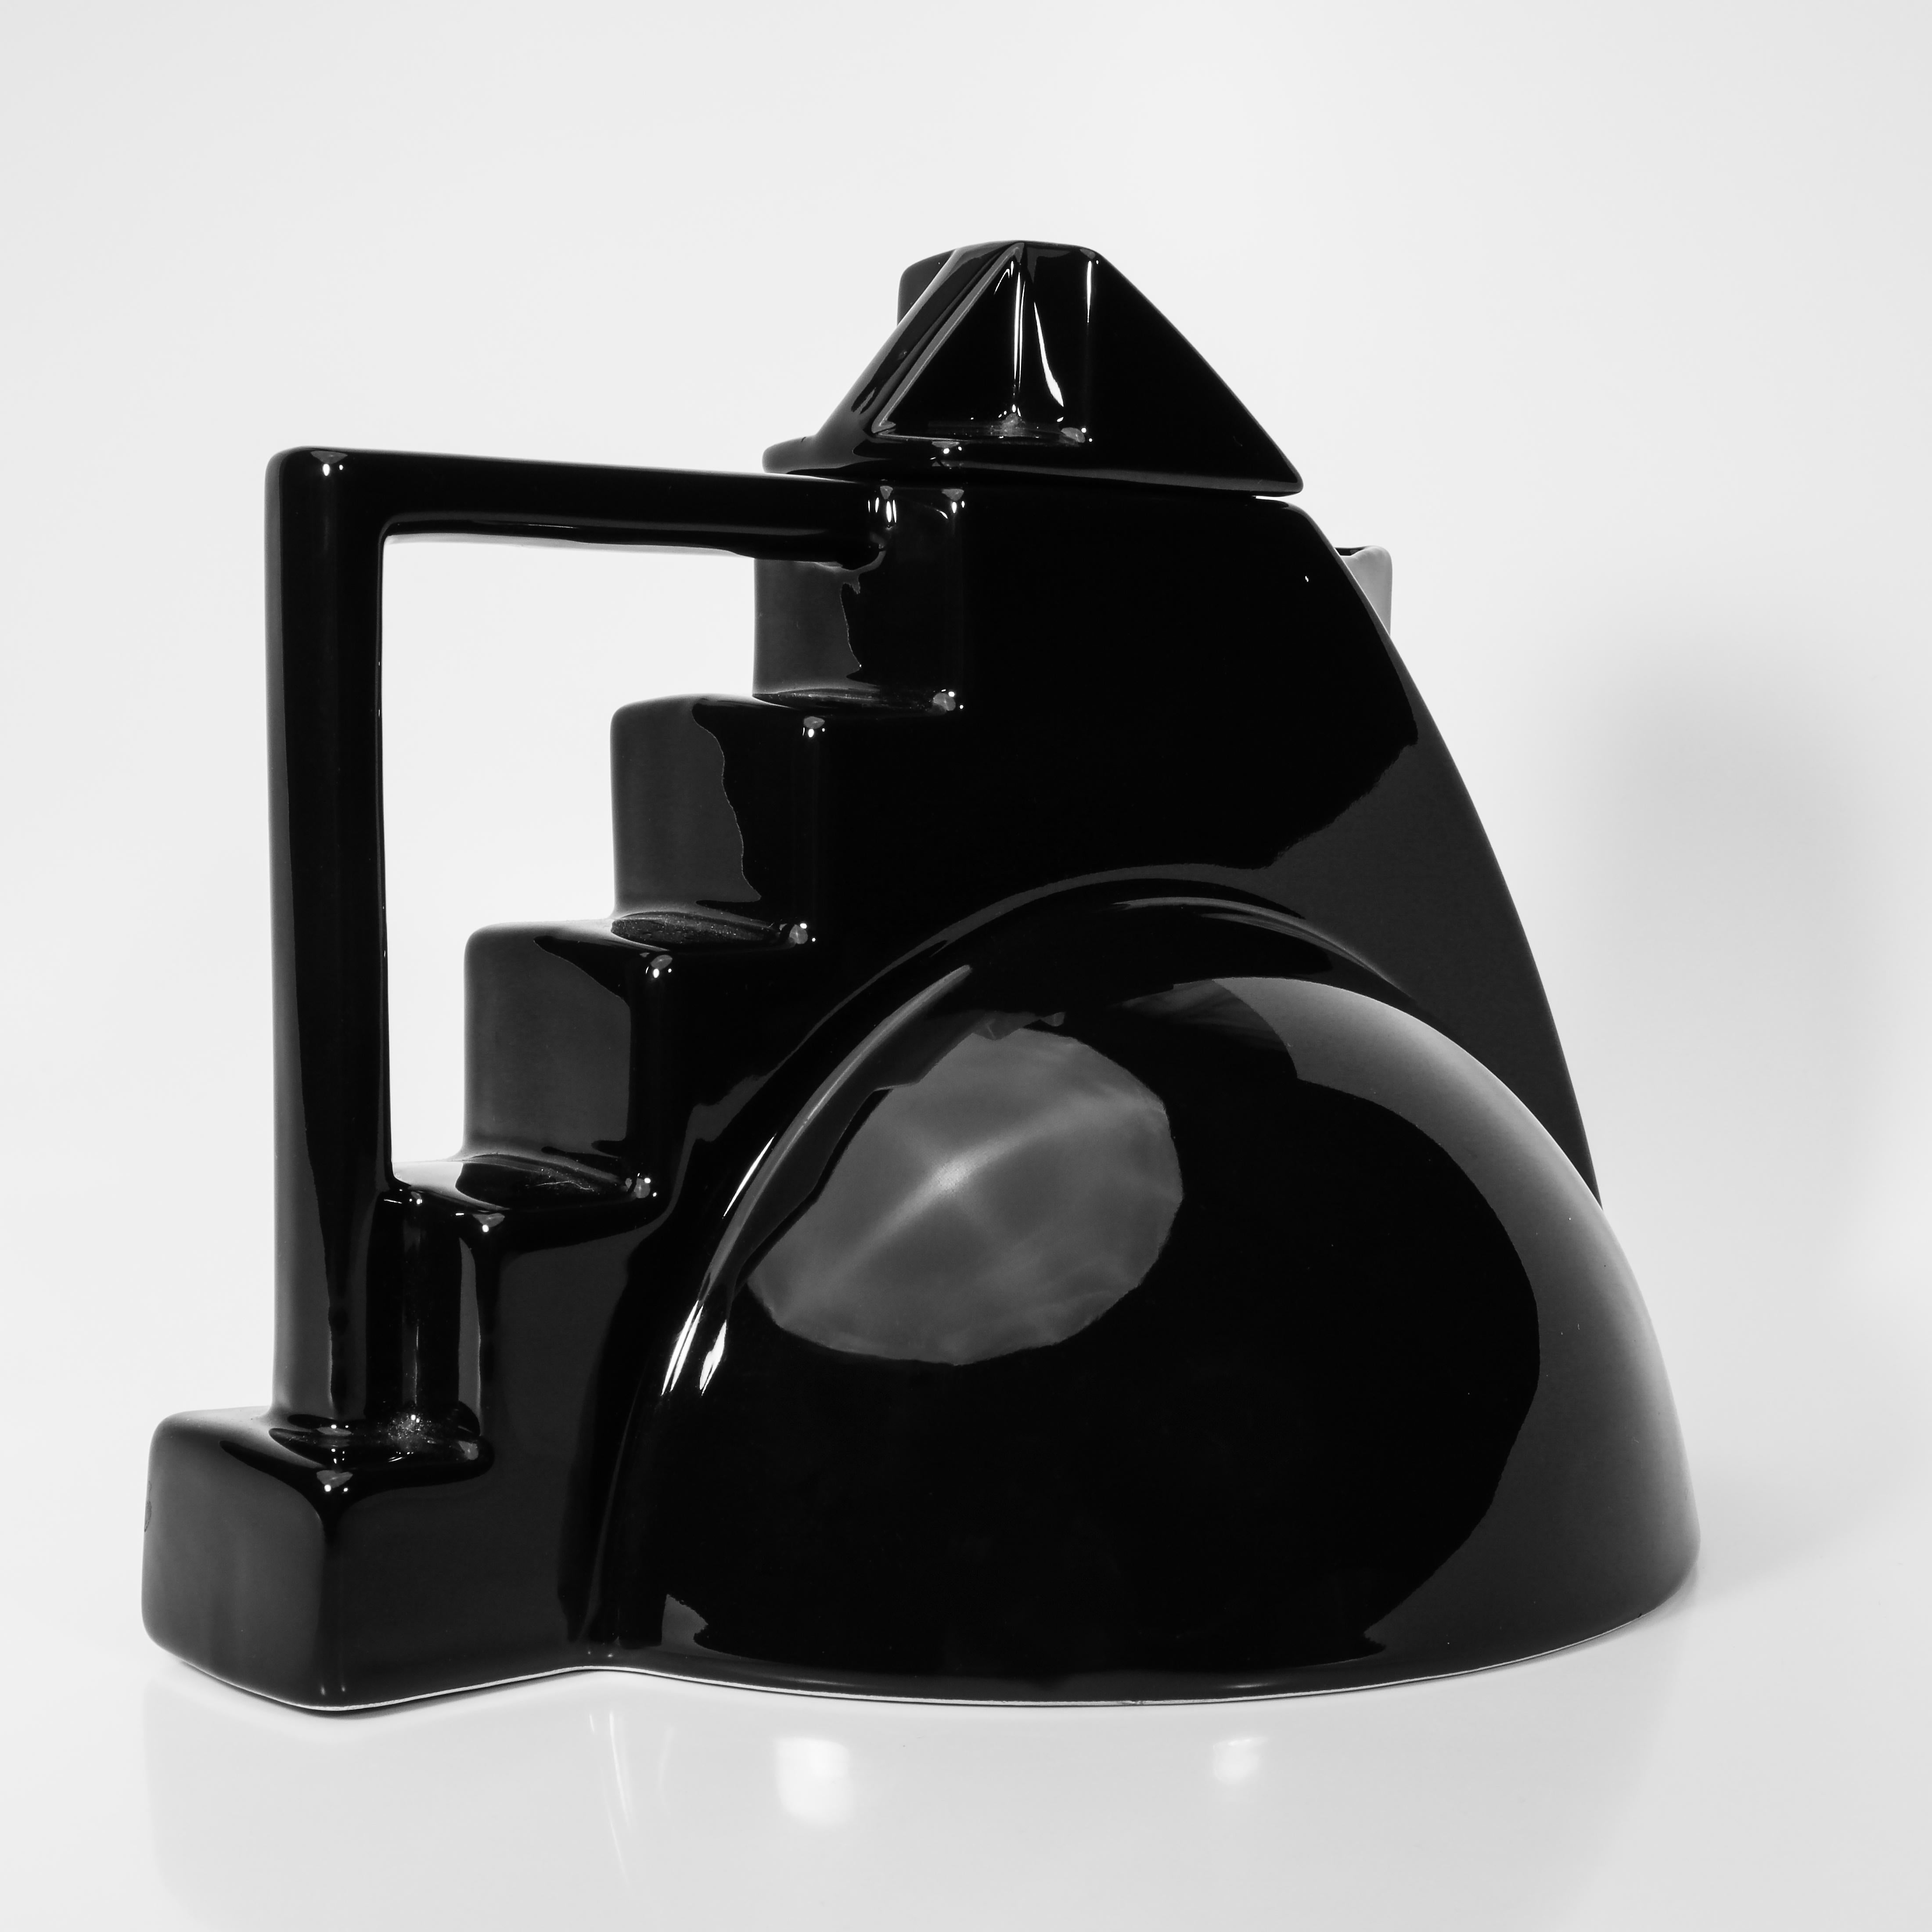 Contemporary Postmodern Teapot by Pierre Casenove for Salins Studio, France, 1985